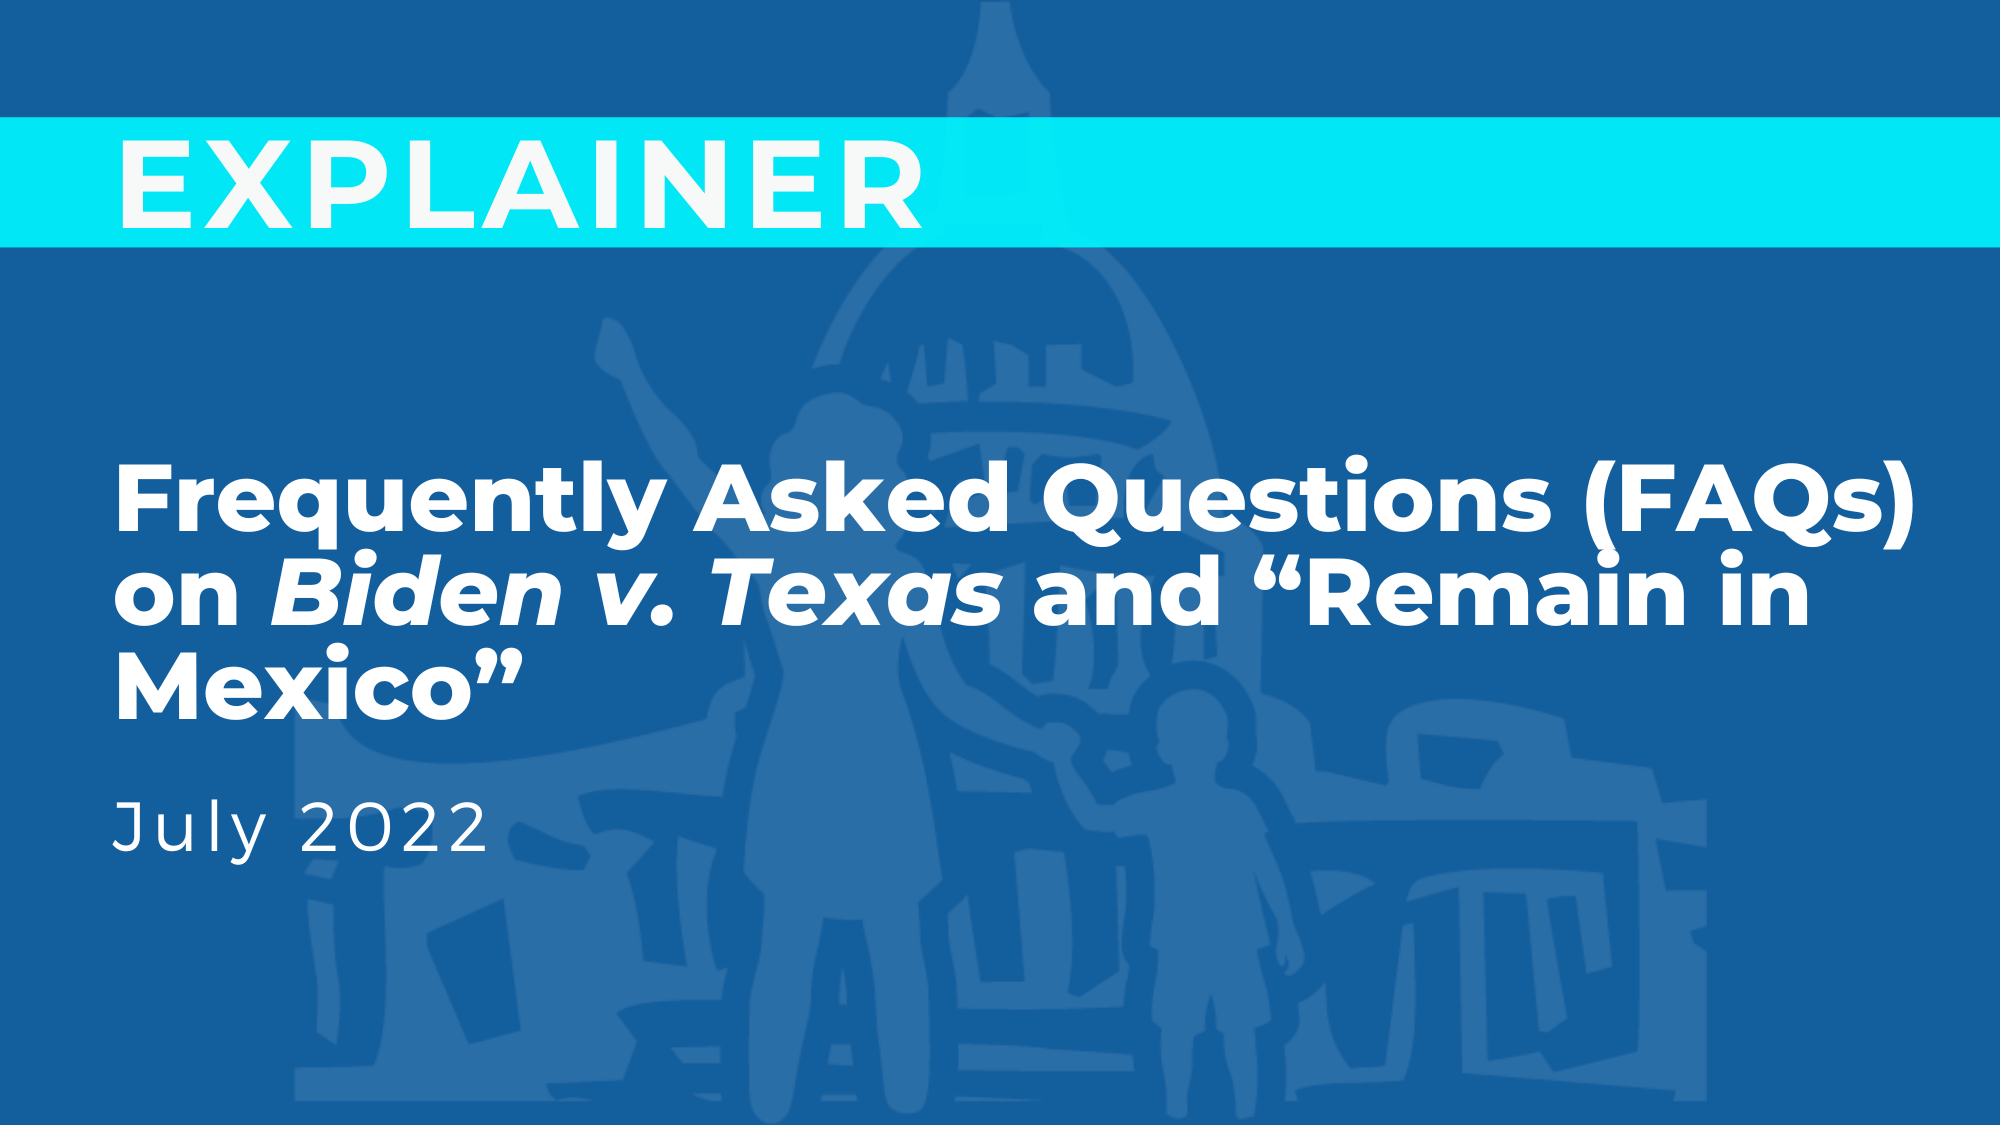 Frequently Asked Questions (FAQs) on Biden v. Texas and “Remain in Mexico”